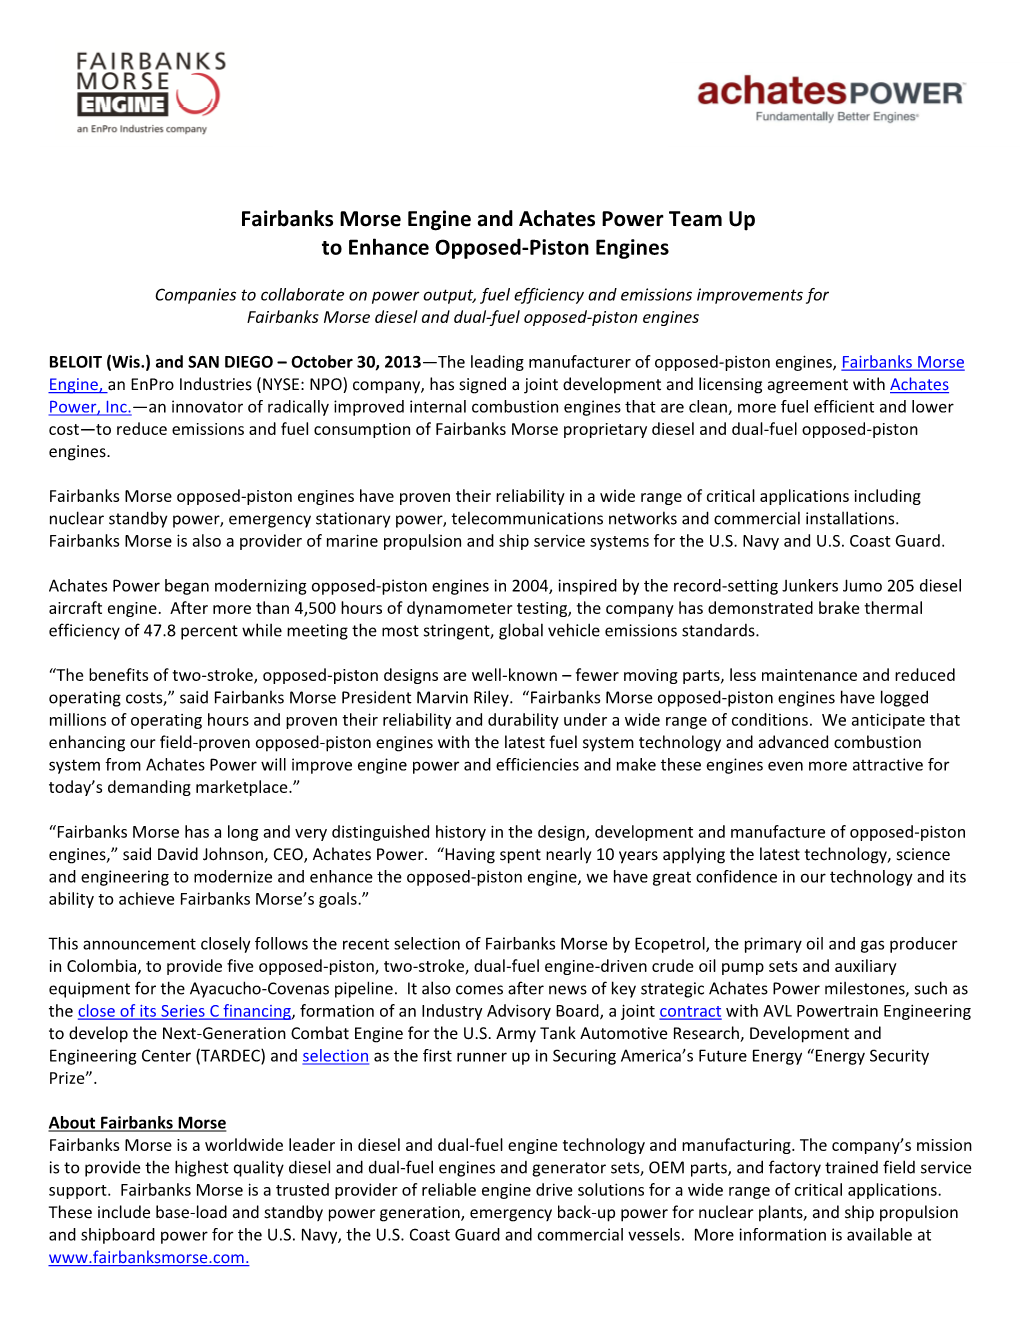 Fairbanks Morse Engine and Achates Power Team up to Enhance Opposed-Piston Engines